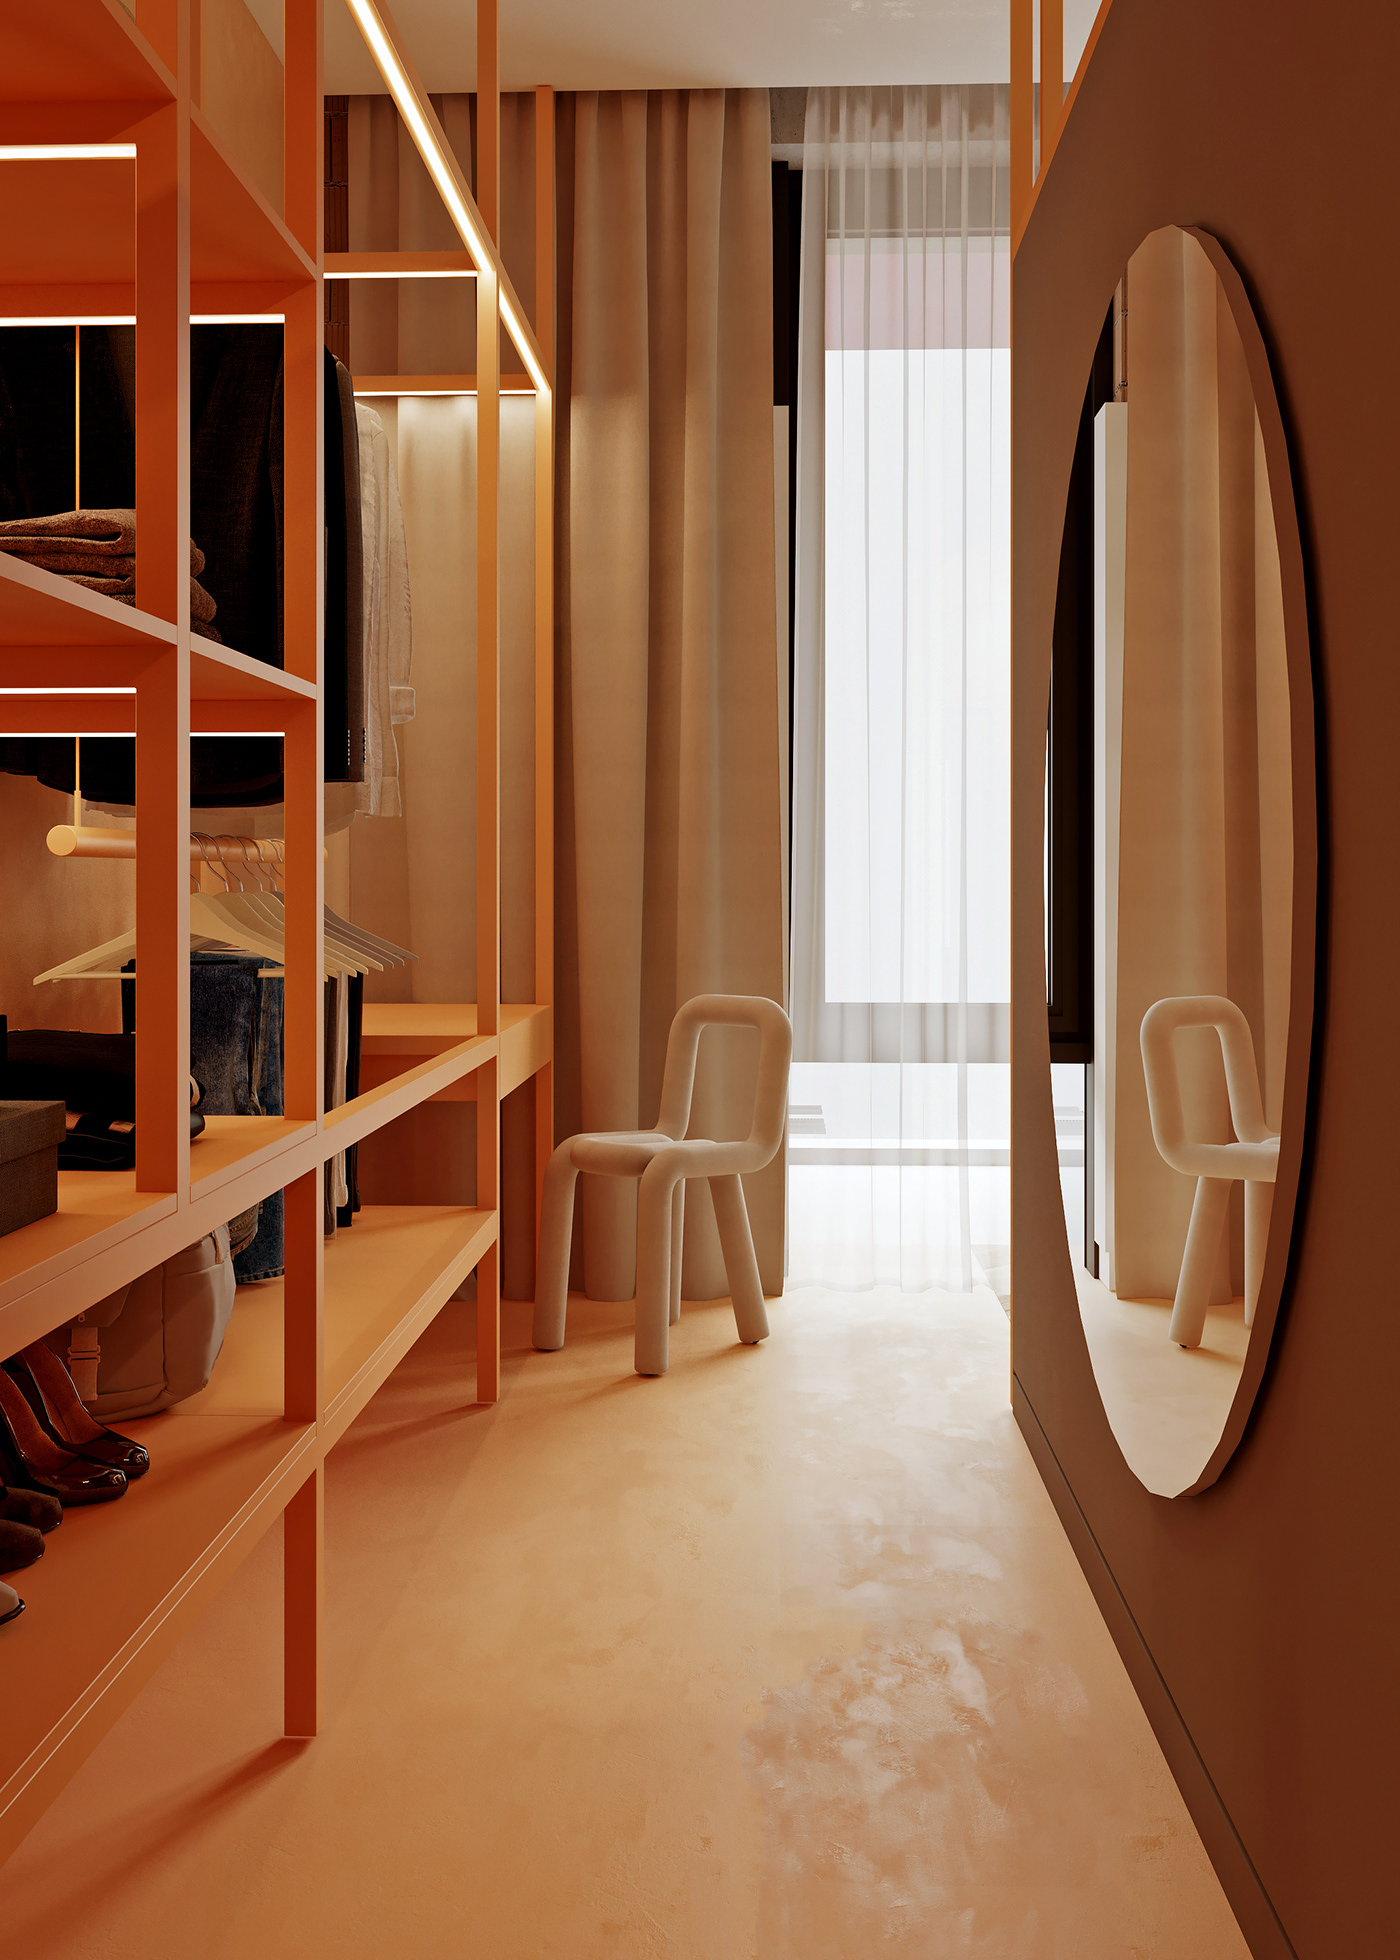 A wardrobe with an open design aids in the selection of clothing and accessories. Yellow light provides a sense of calm and relaxation.